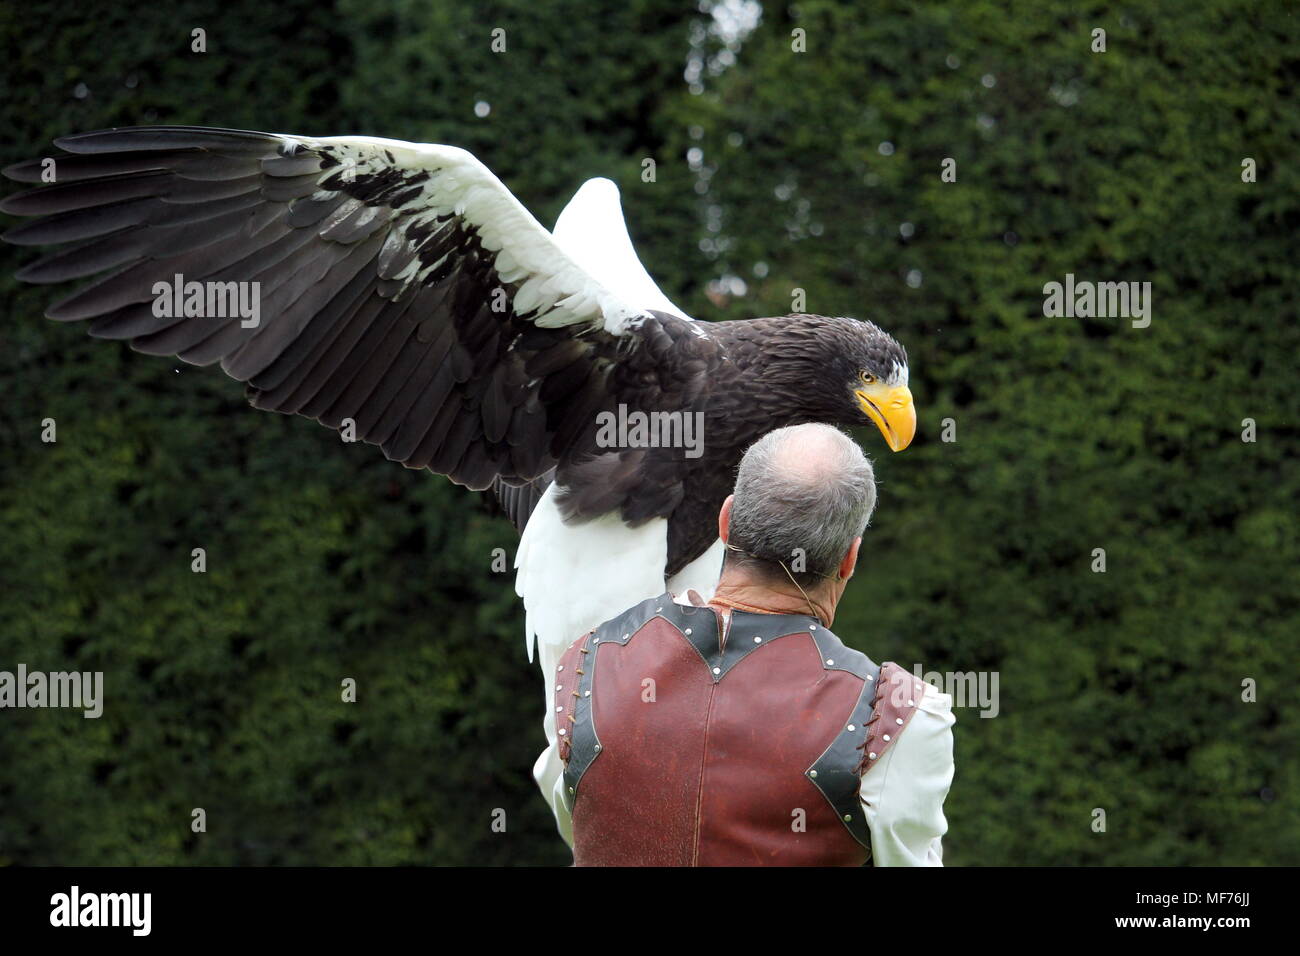 Warwick, UK - September 17 2017: A falconer with his Stellers Sea Eagle (Haliaeetus pelagicus) during a falconry display at Warwick Castle Stock Photo